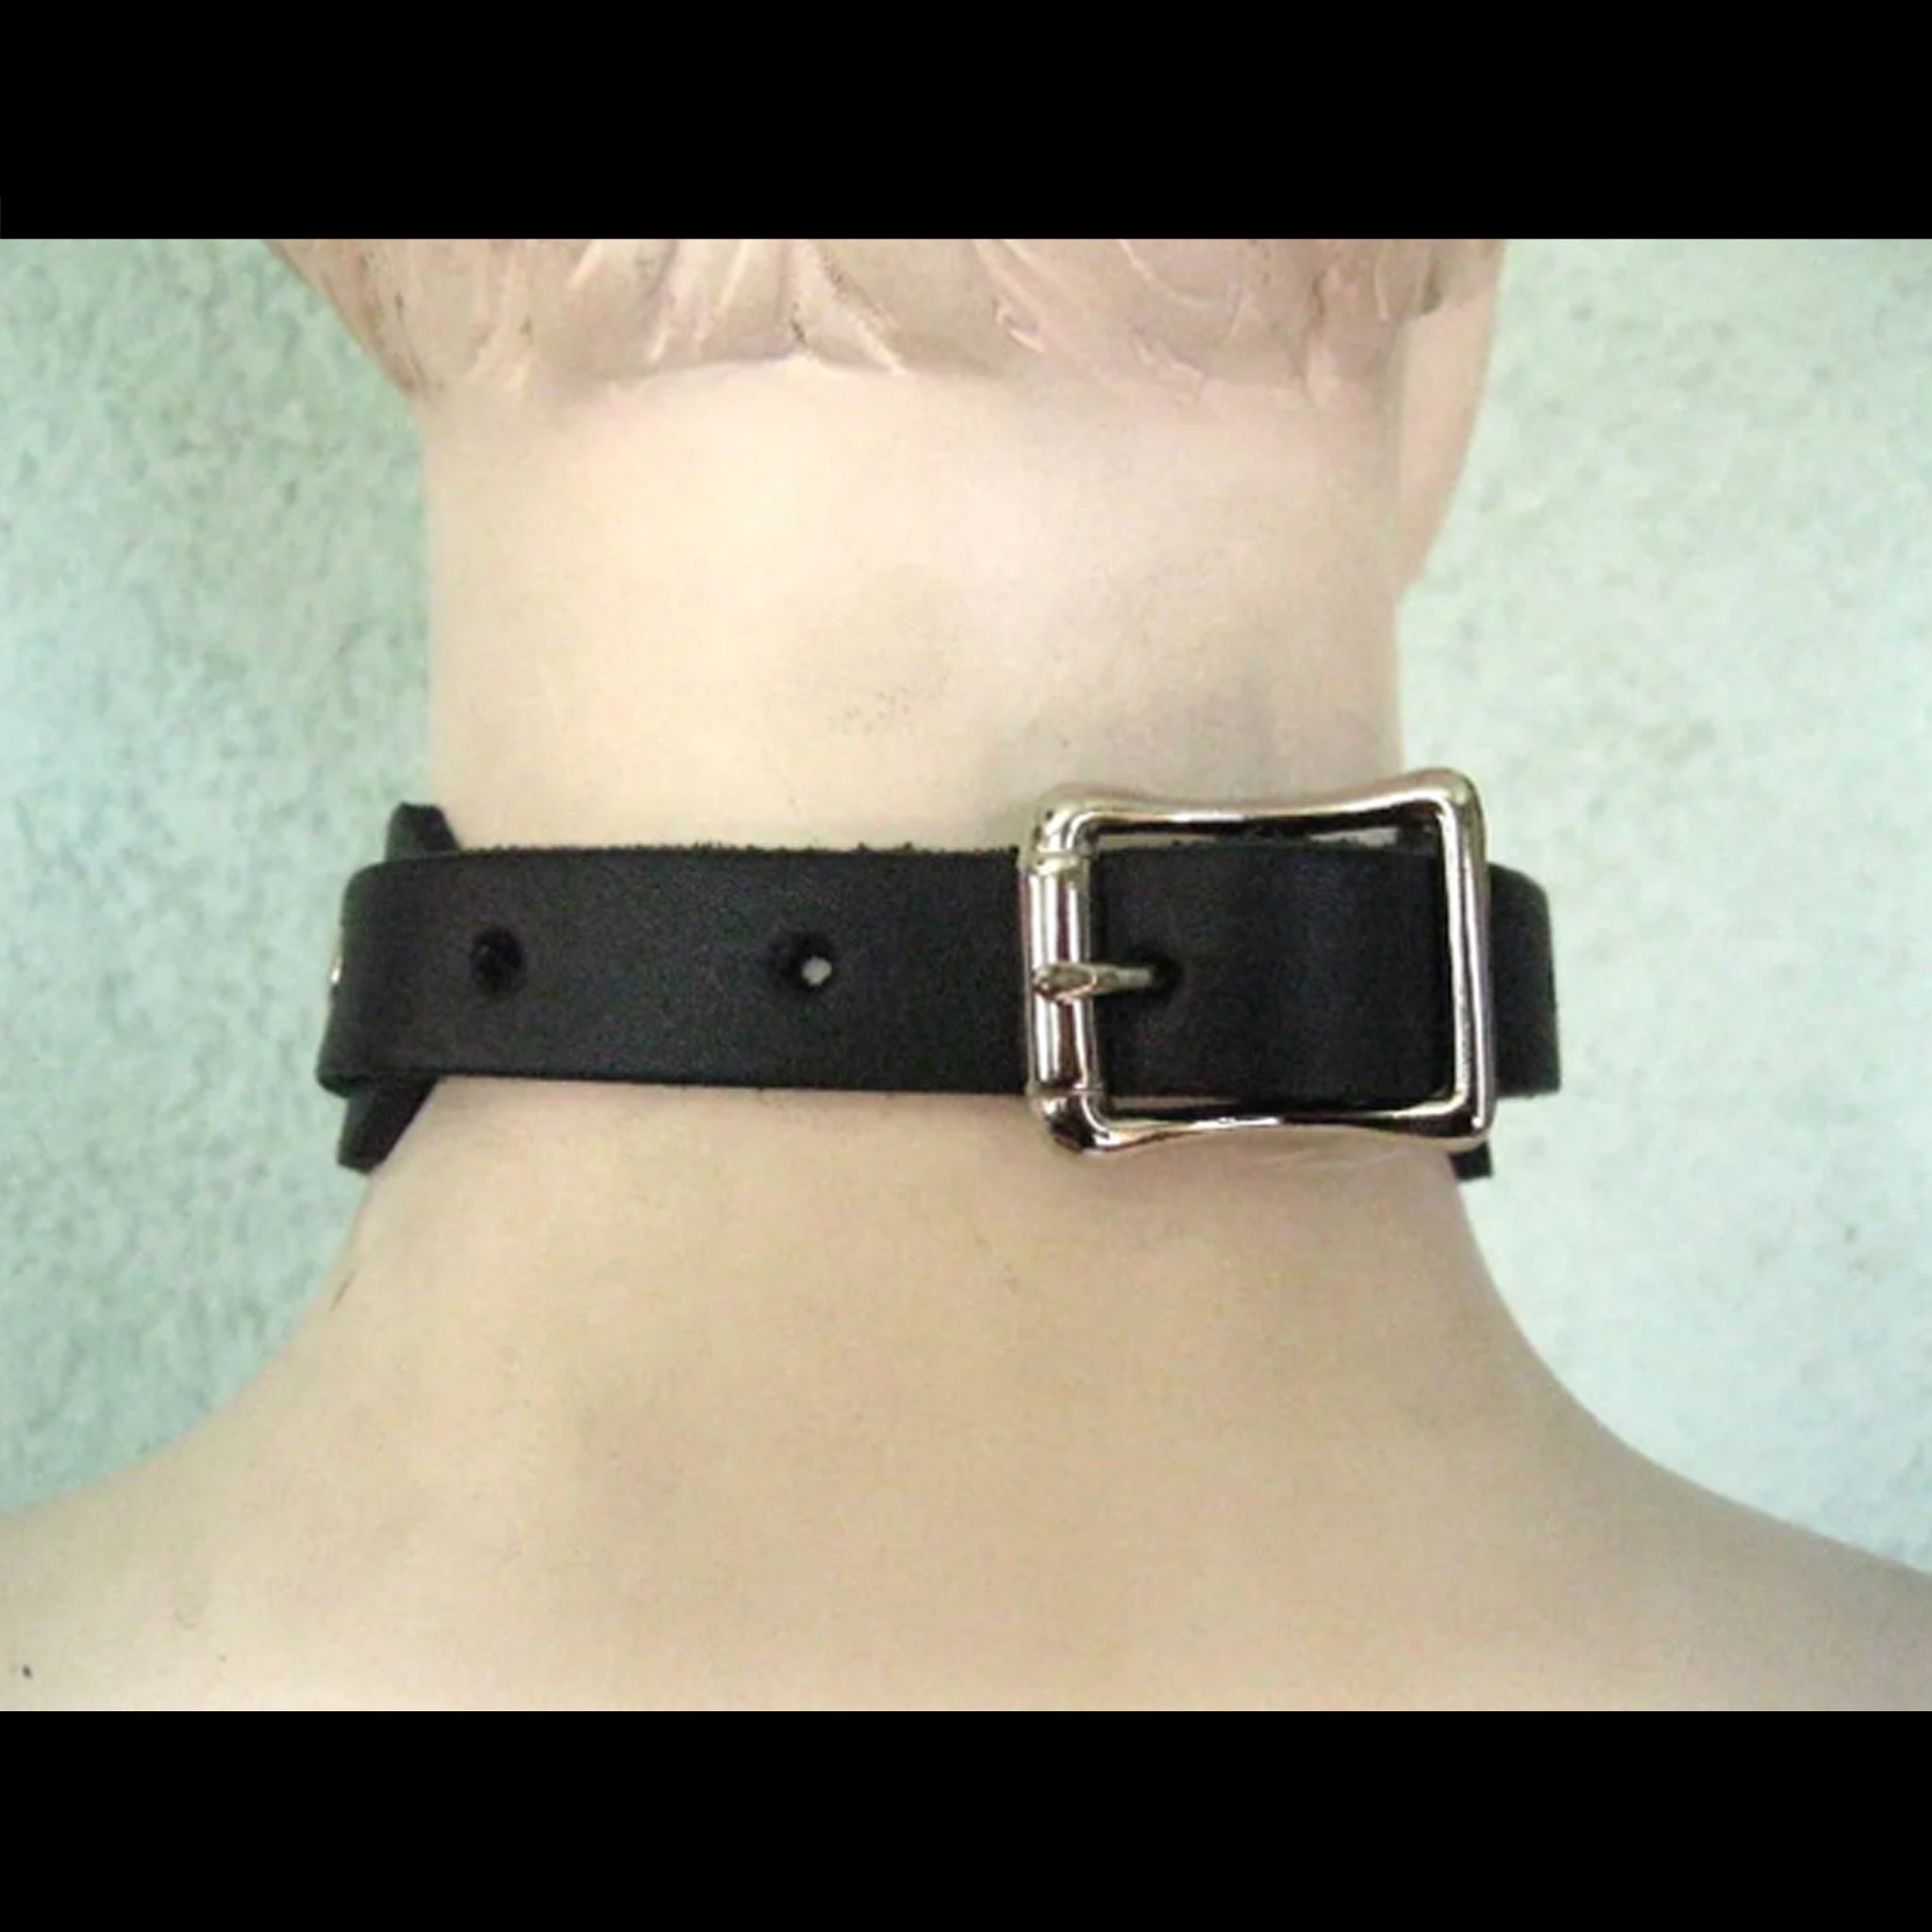 1 ring spiked choker